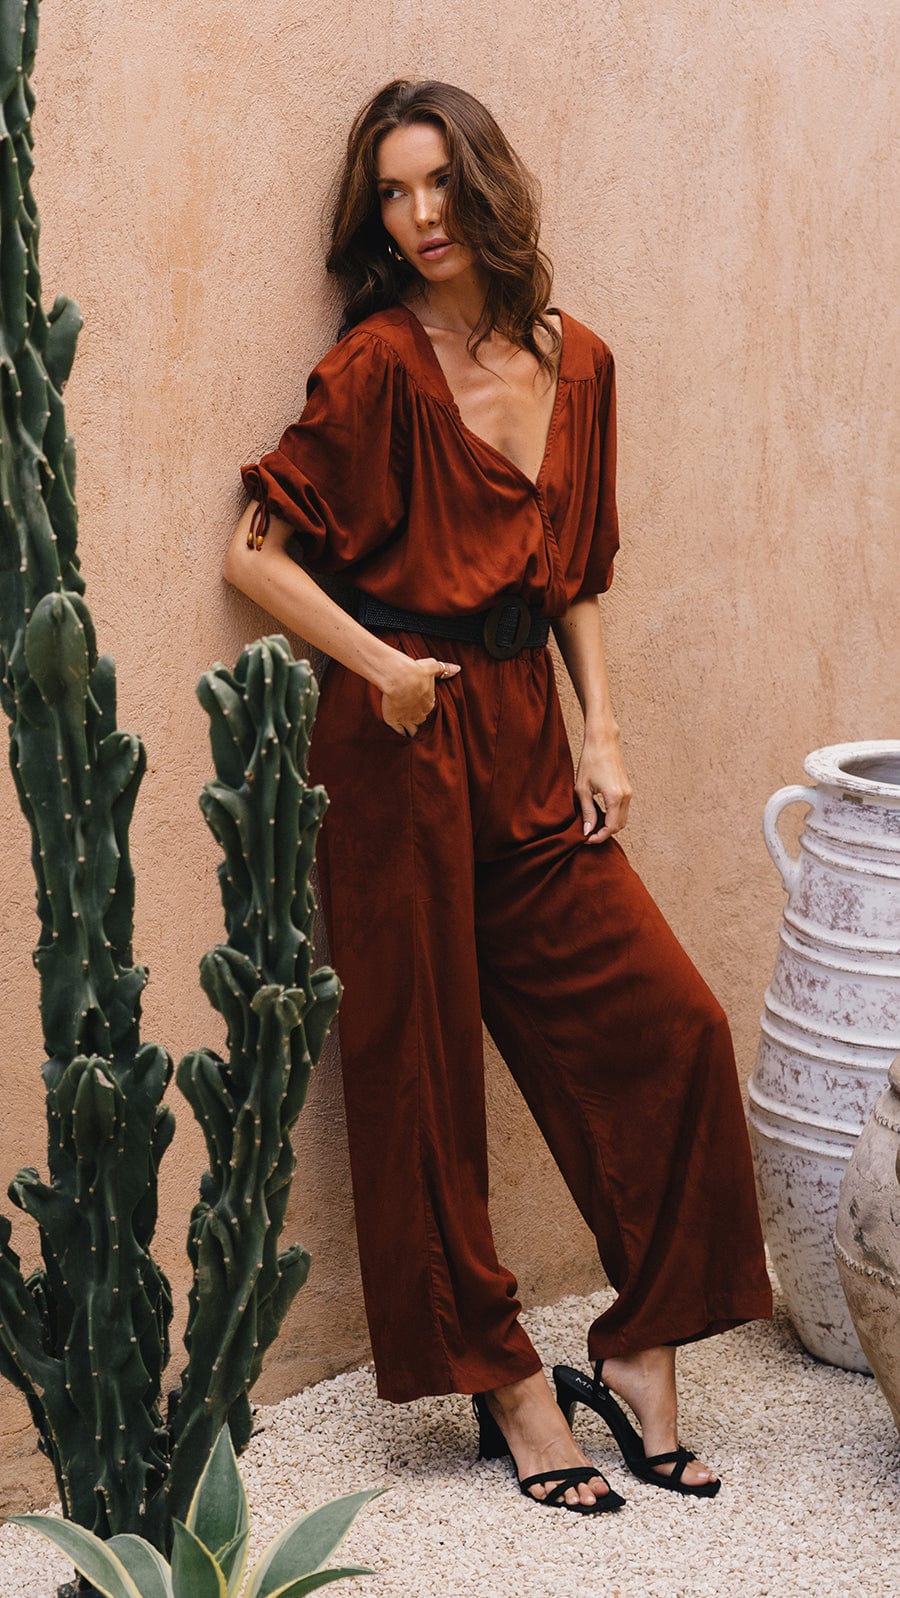 khushclothing JUMPSUITS All-in-one Amalfi Jumpsuit - Murky Syrah